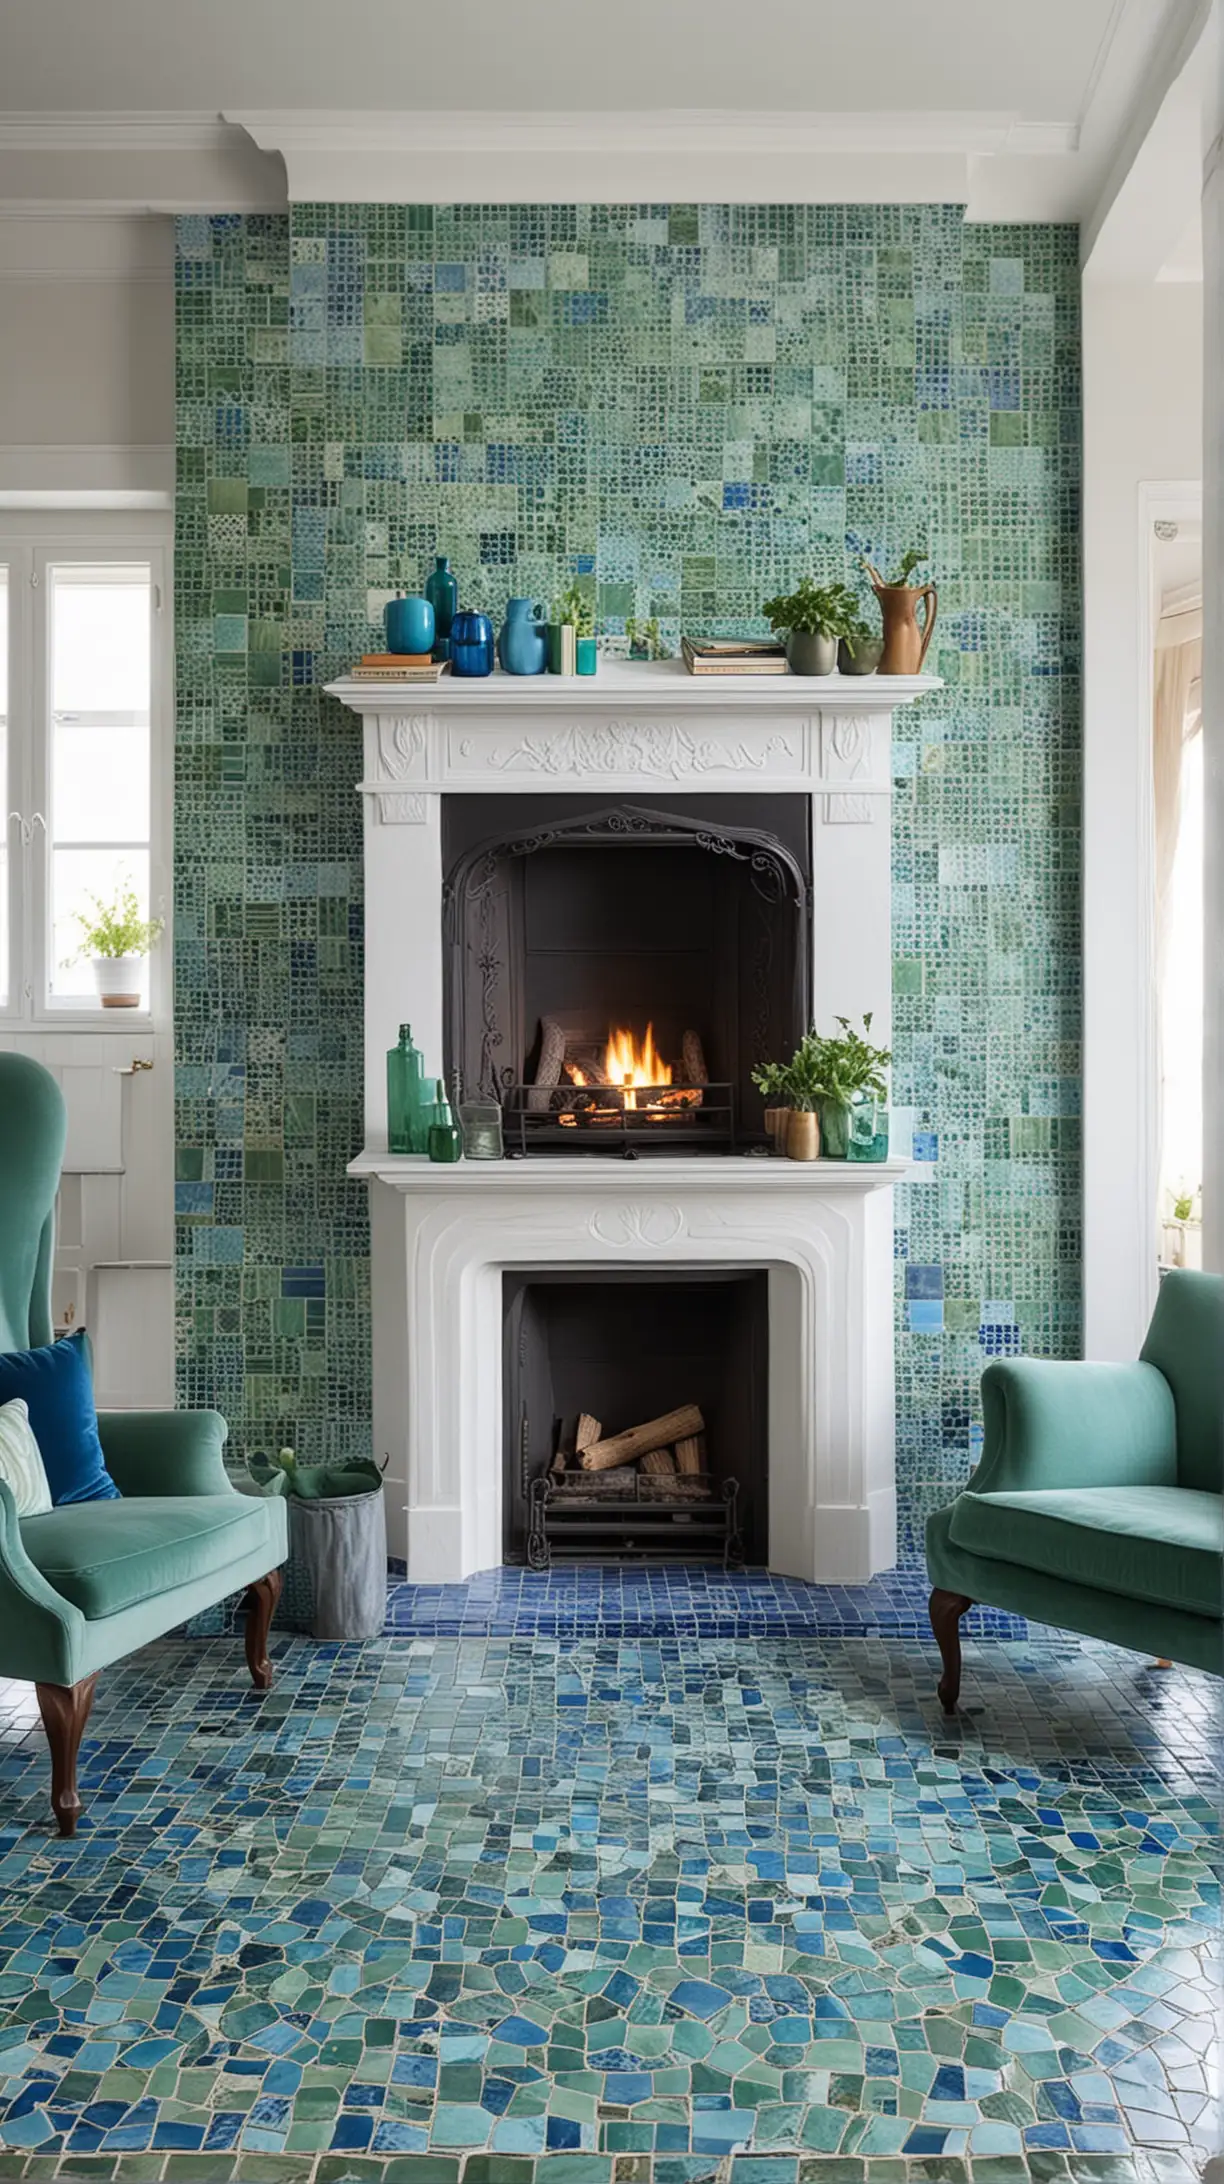 Blue and Green Living Room with Artistic Fireplace Tiles and Sitting Chairs